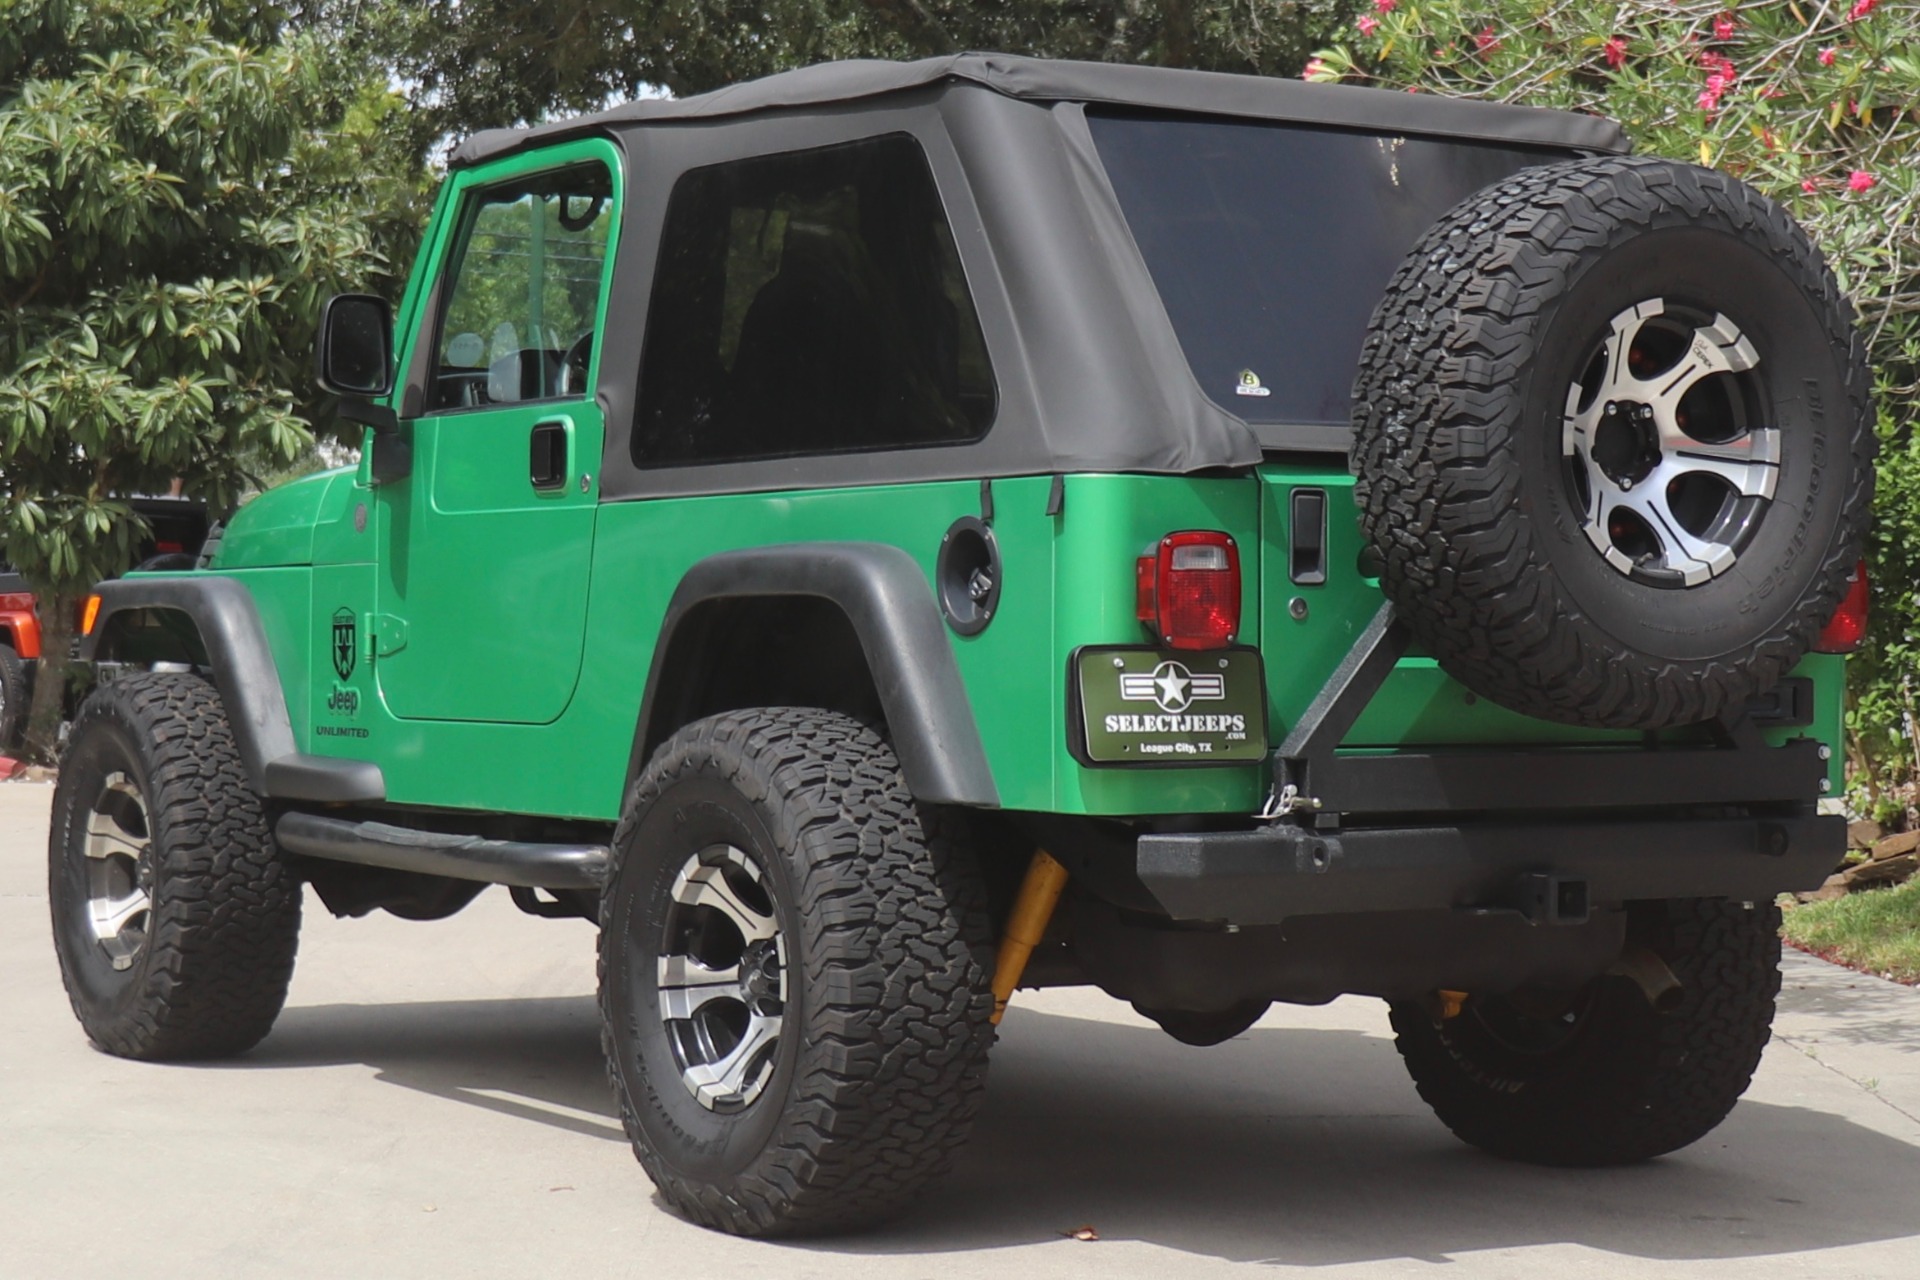 Used 2004 Jeep Wrangler Unlimited For Sale ($18,995) | Select Jeeps Inc.  Stock #792954